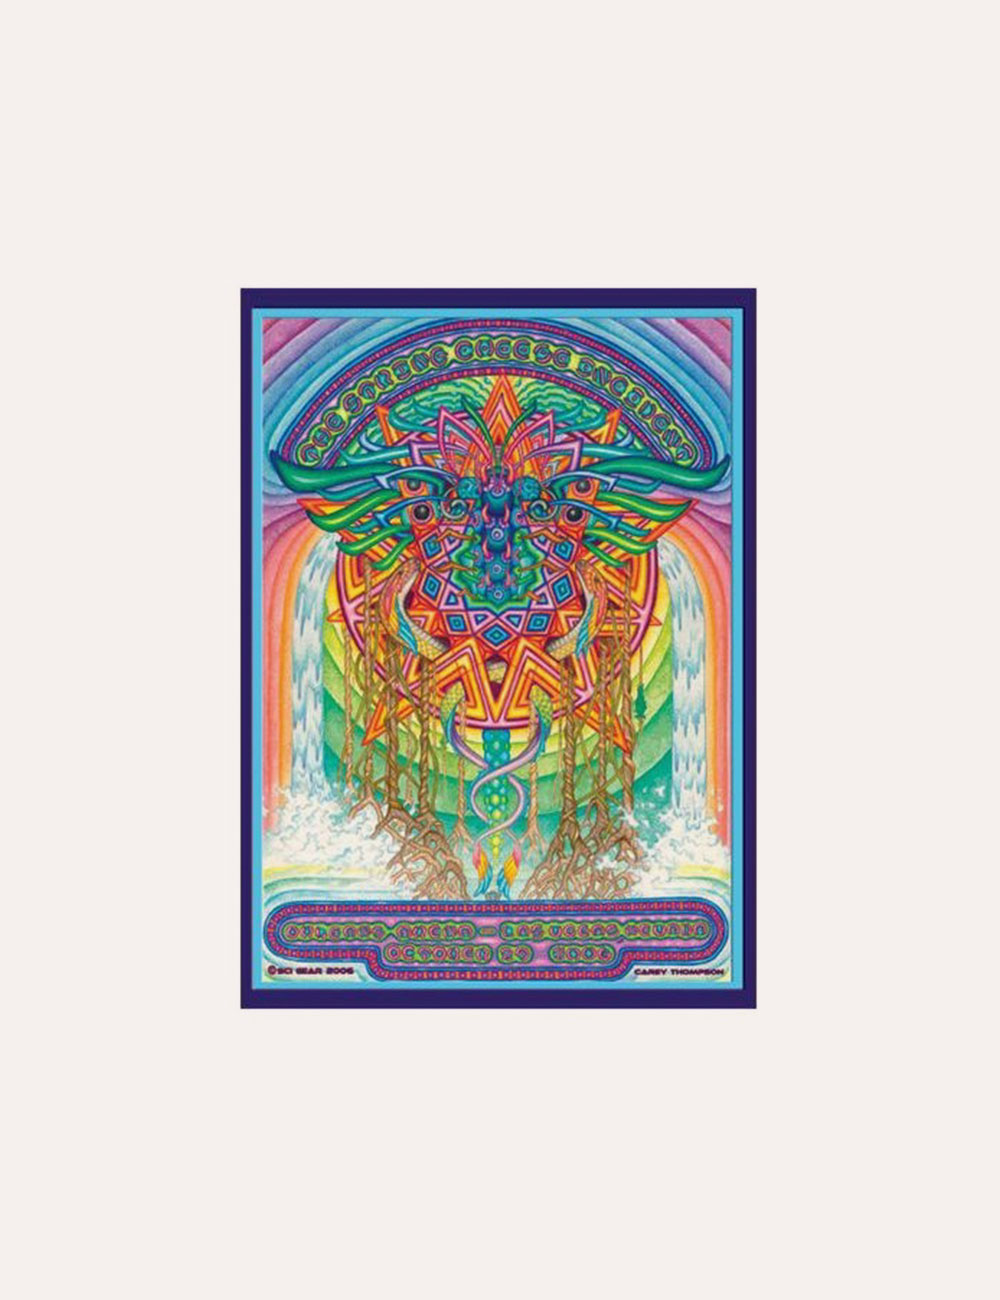 The String Cheese Incident - Merch - Poster - 2006 Las Vegas Poster